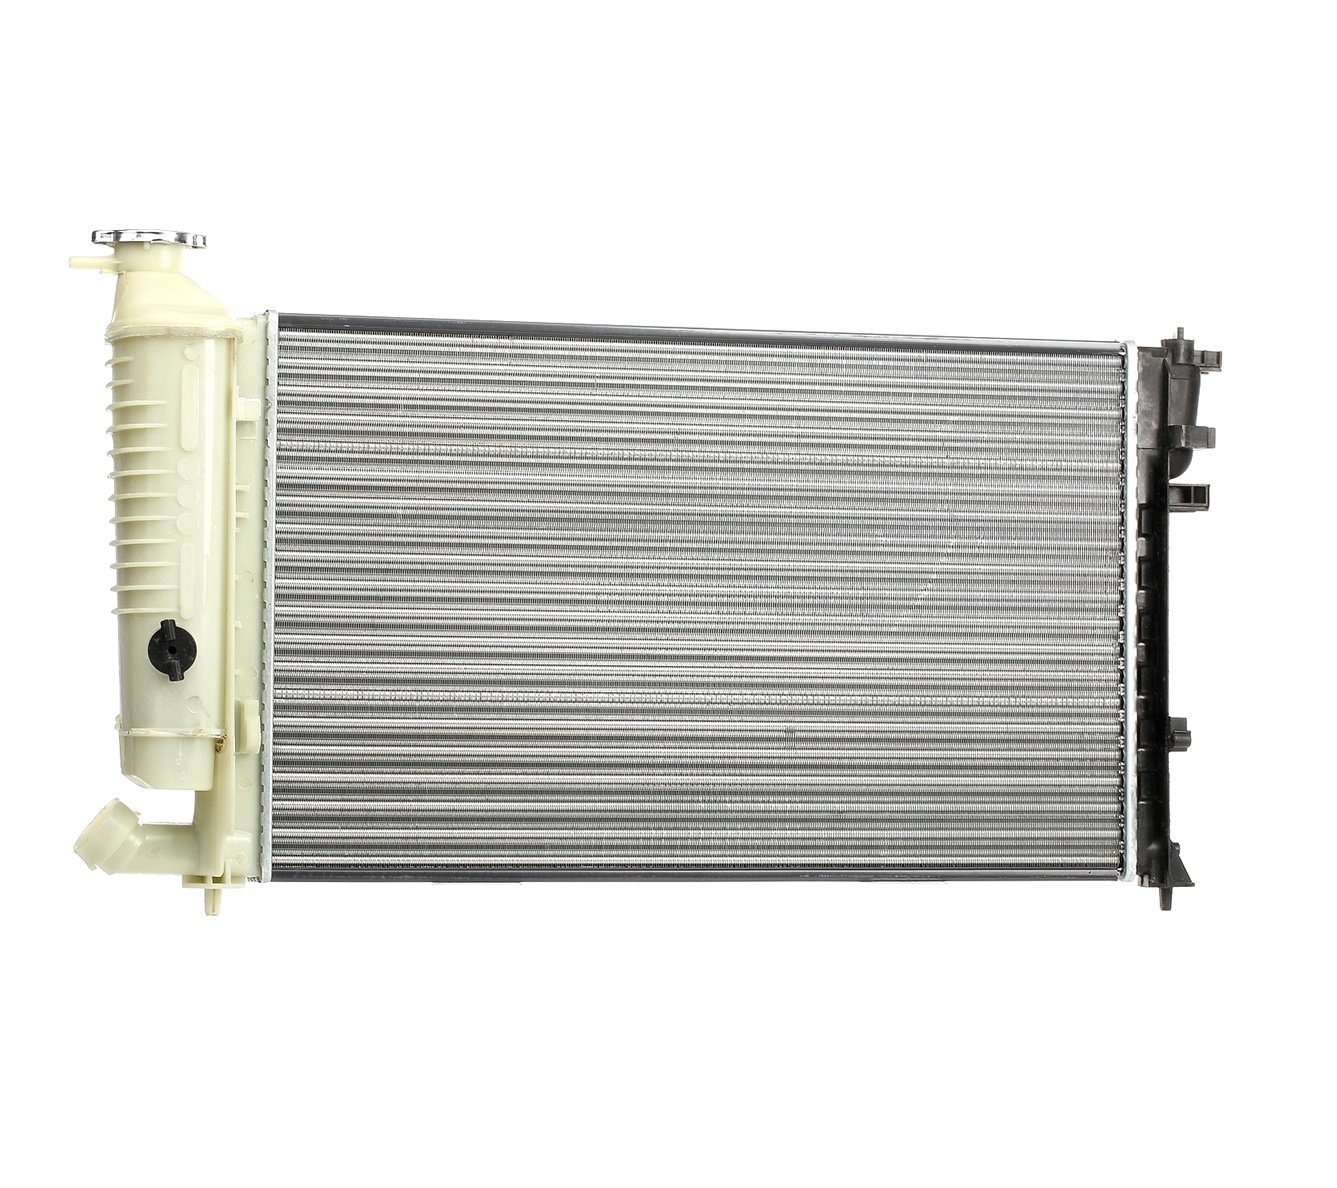 RIDEX 470R0407 Engine radiator Aluminium, 378 x 610 x 23 mm, Mechanically jointed cooling fins